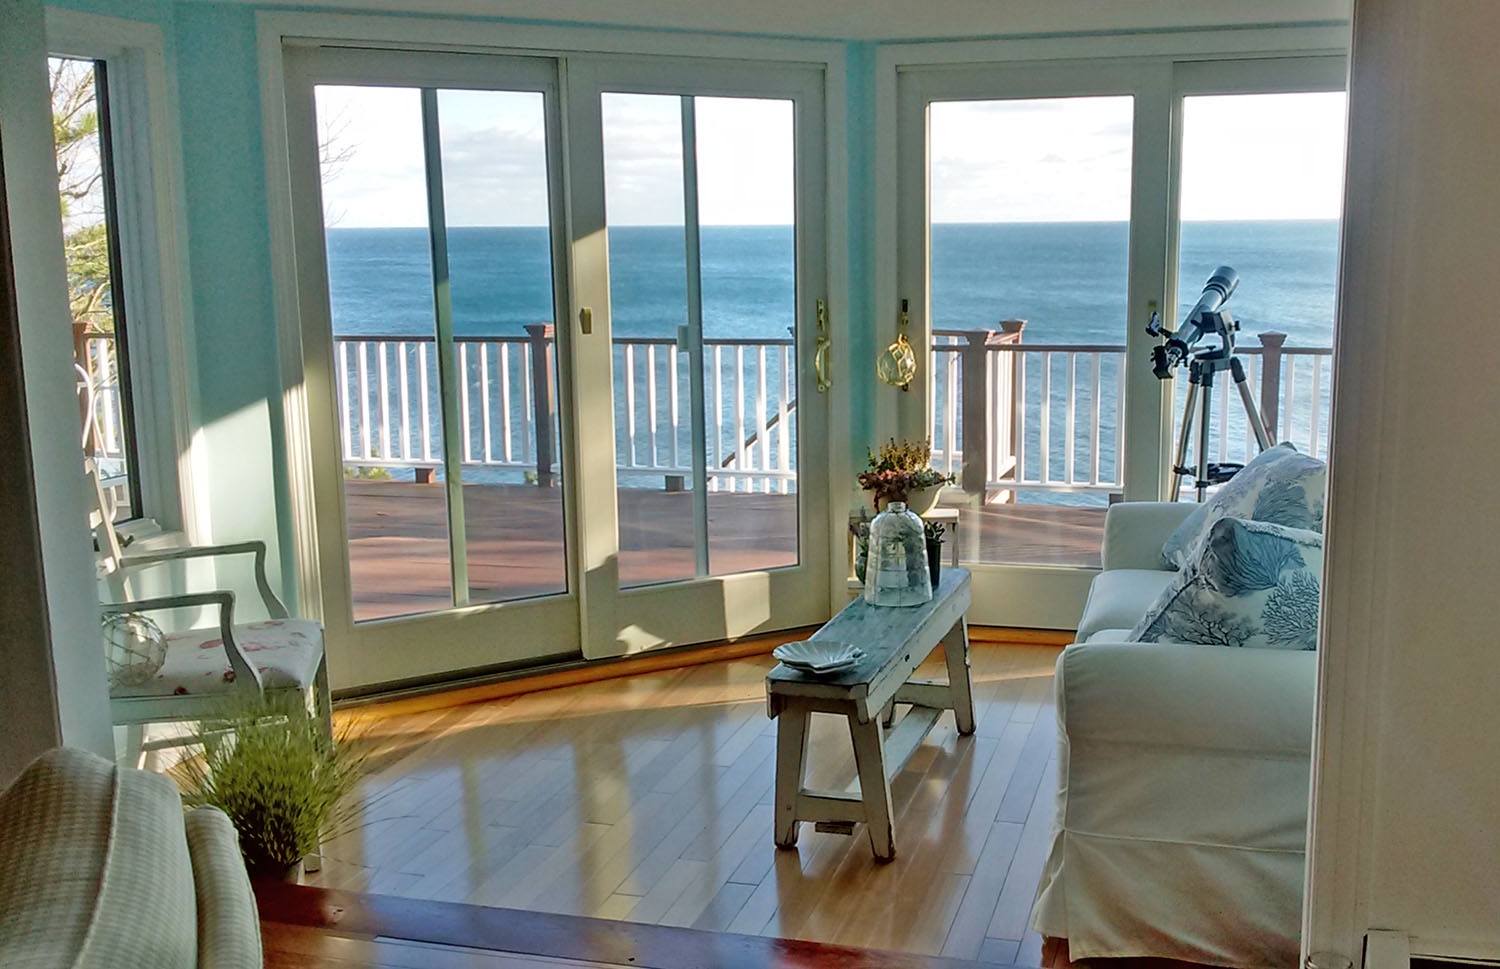 The sun room has a stunning view.